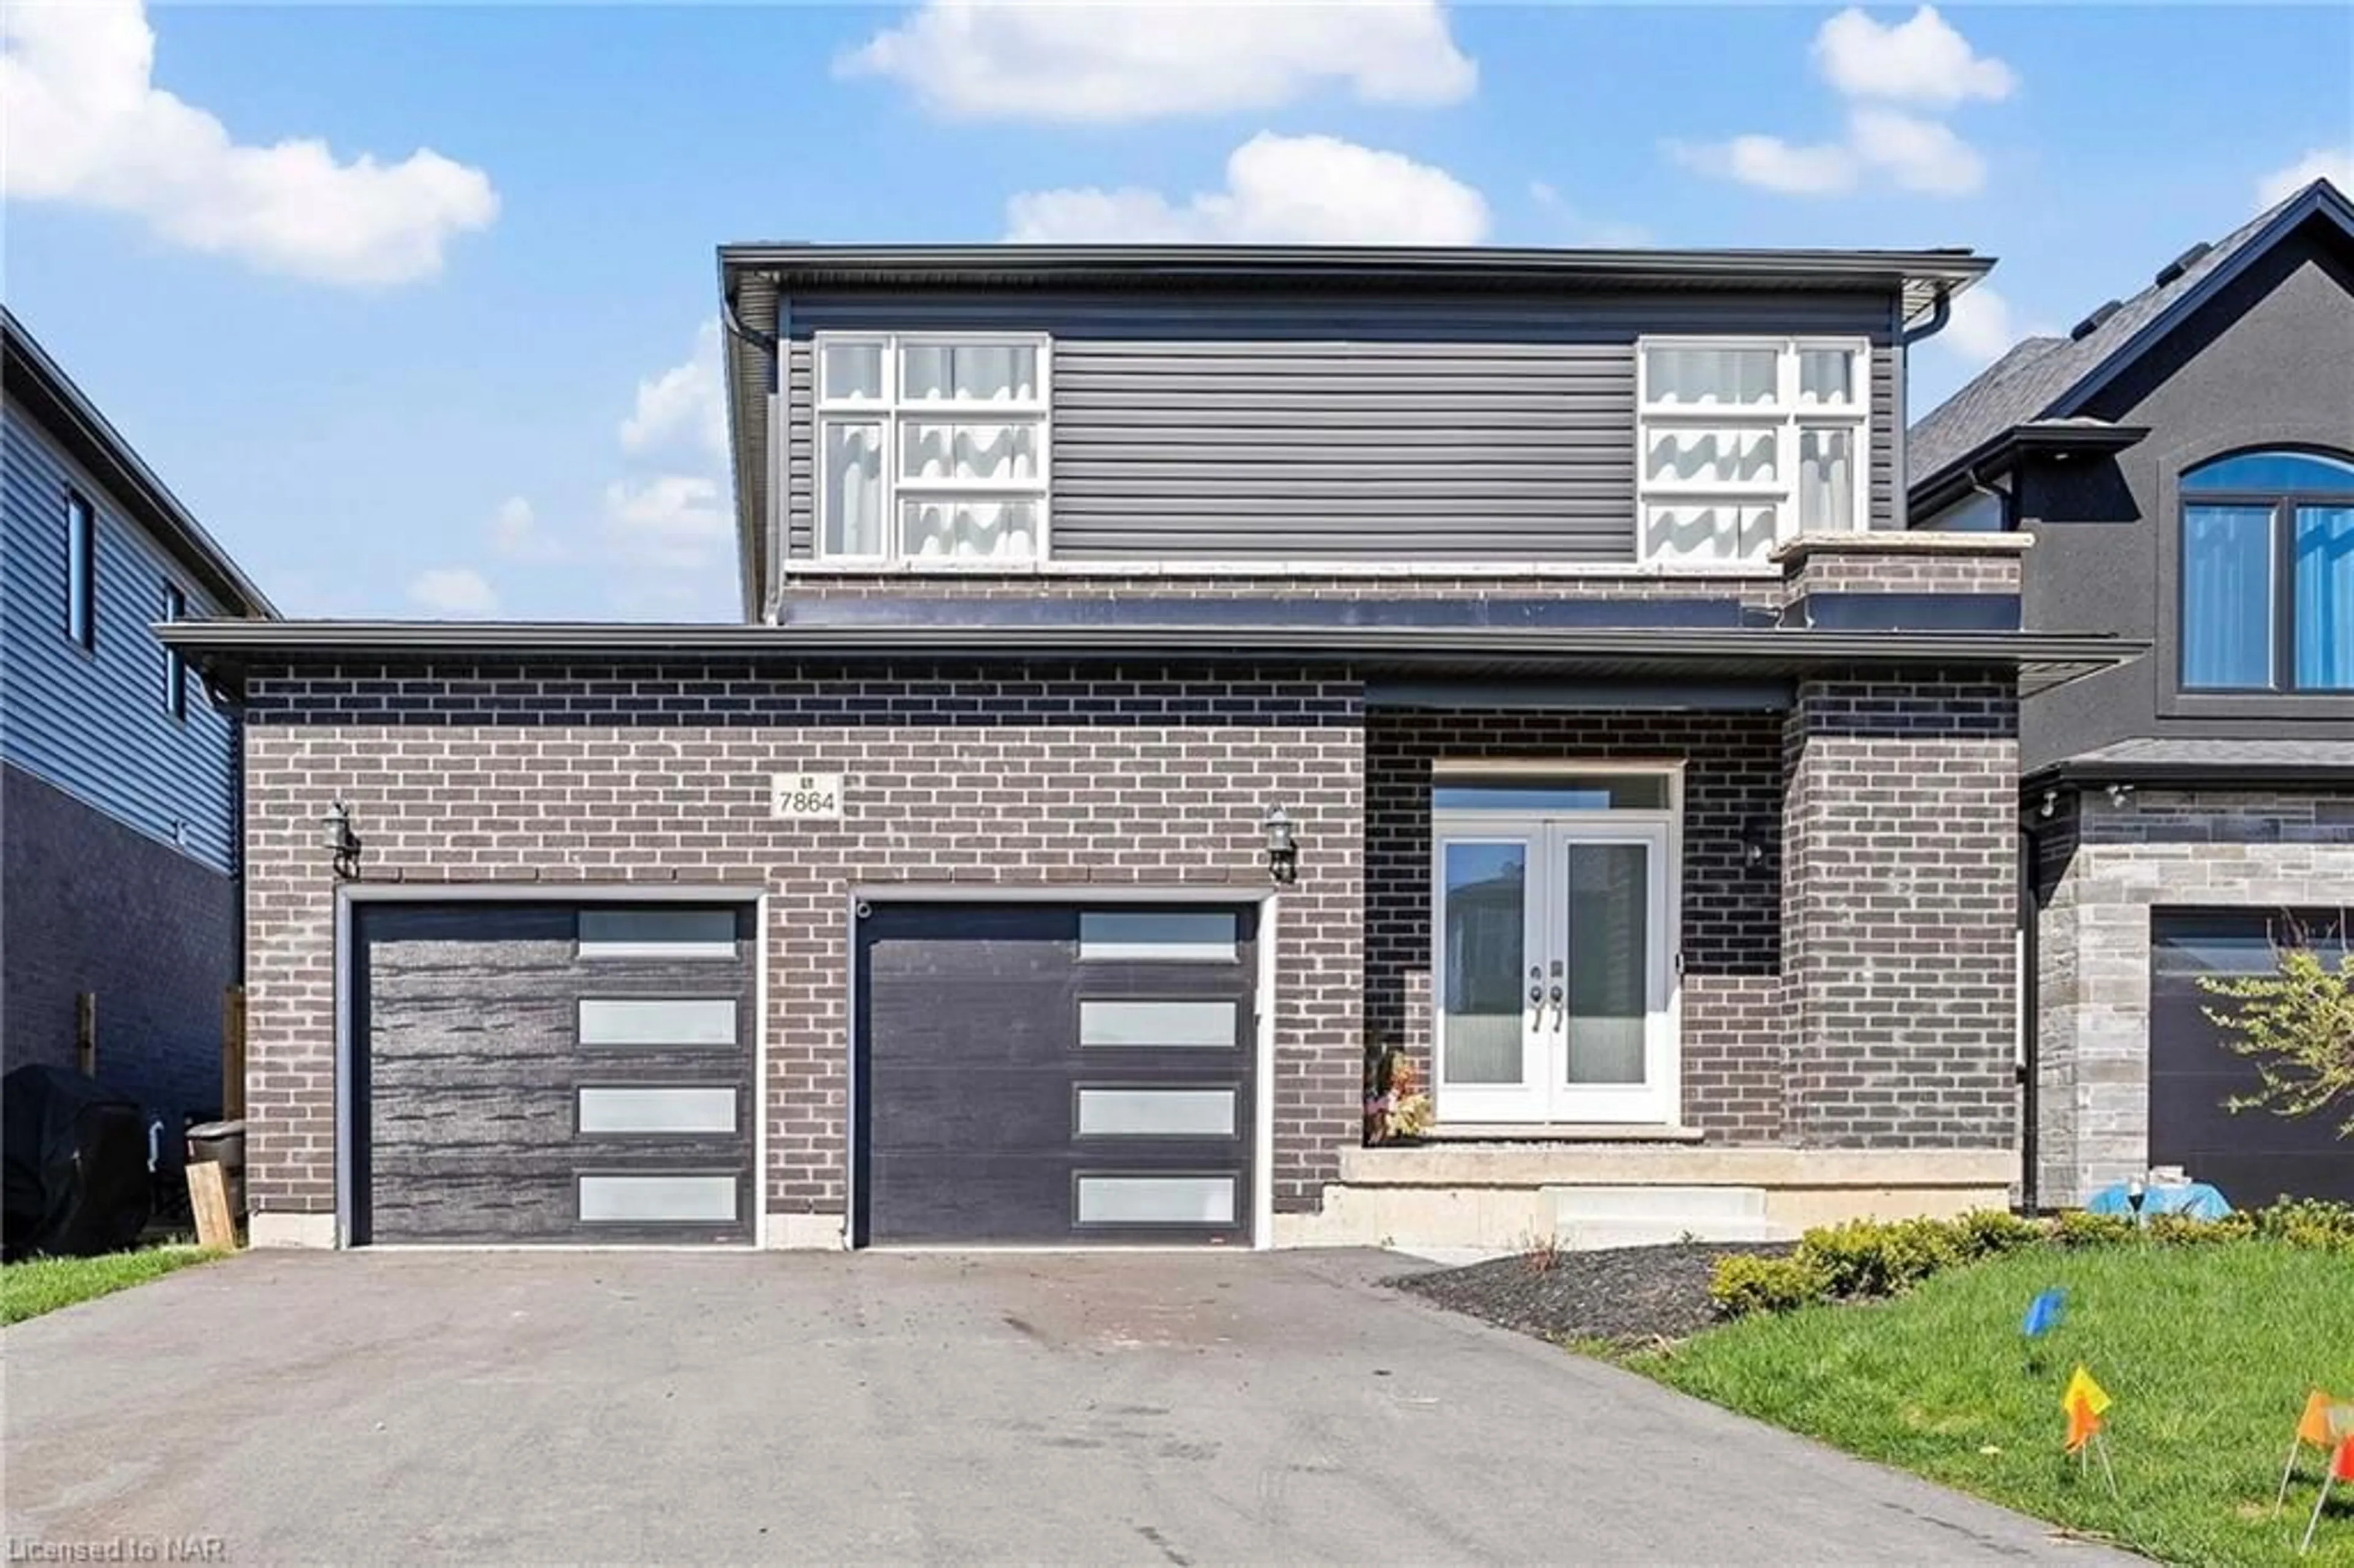 Home with brick exterior material for 7864 Seabiscuit Drive, Niagara Falls Ontario L2H 3T9